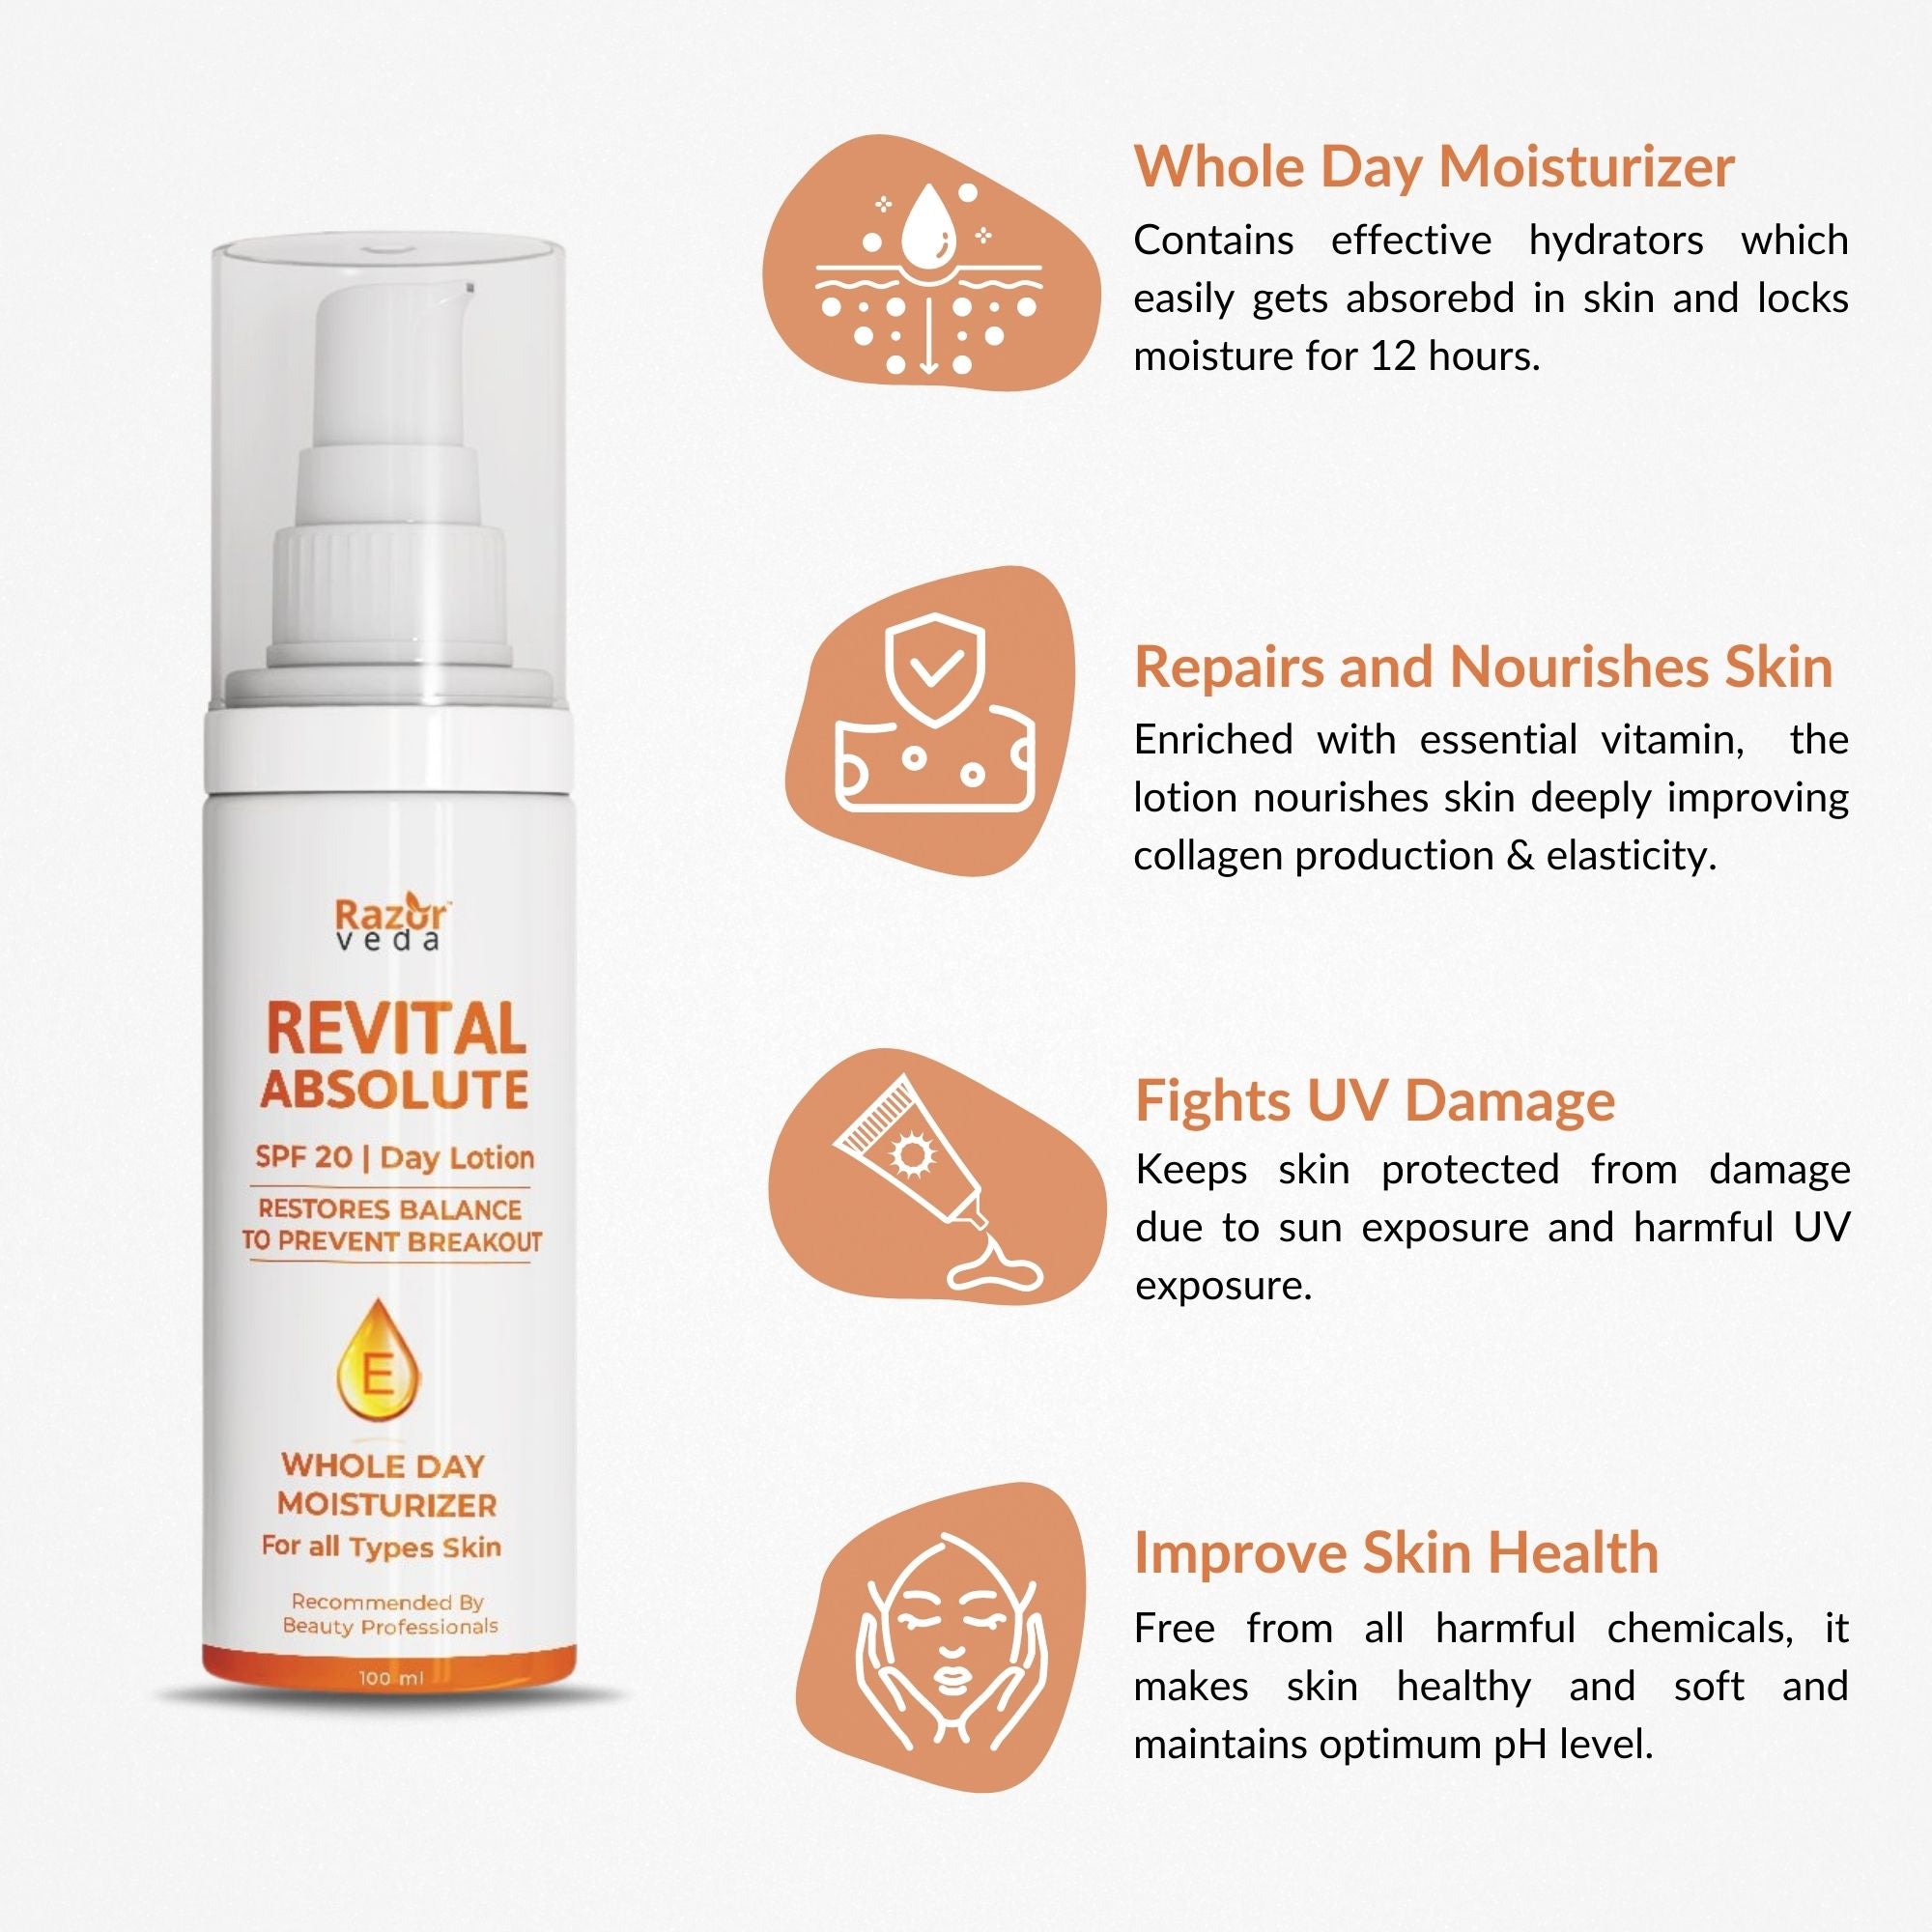 REVITAL ABSOLUTE Clear Moisturizer with SPF 20 for Whole Day Moisturization & Healthy Skin Razorveda